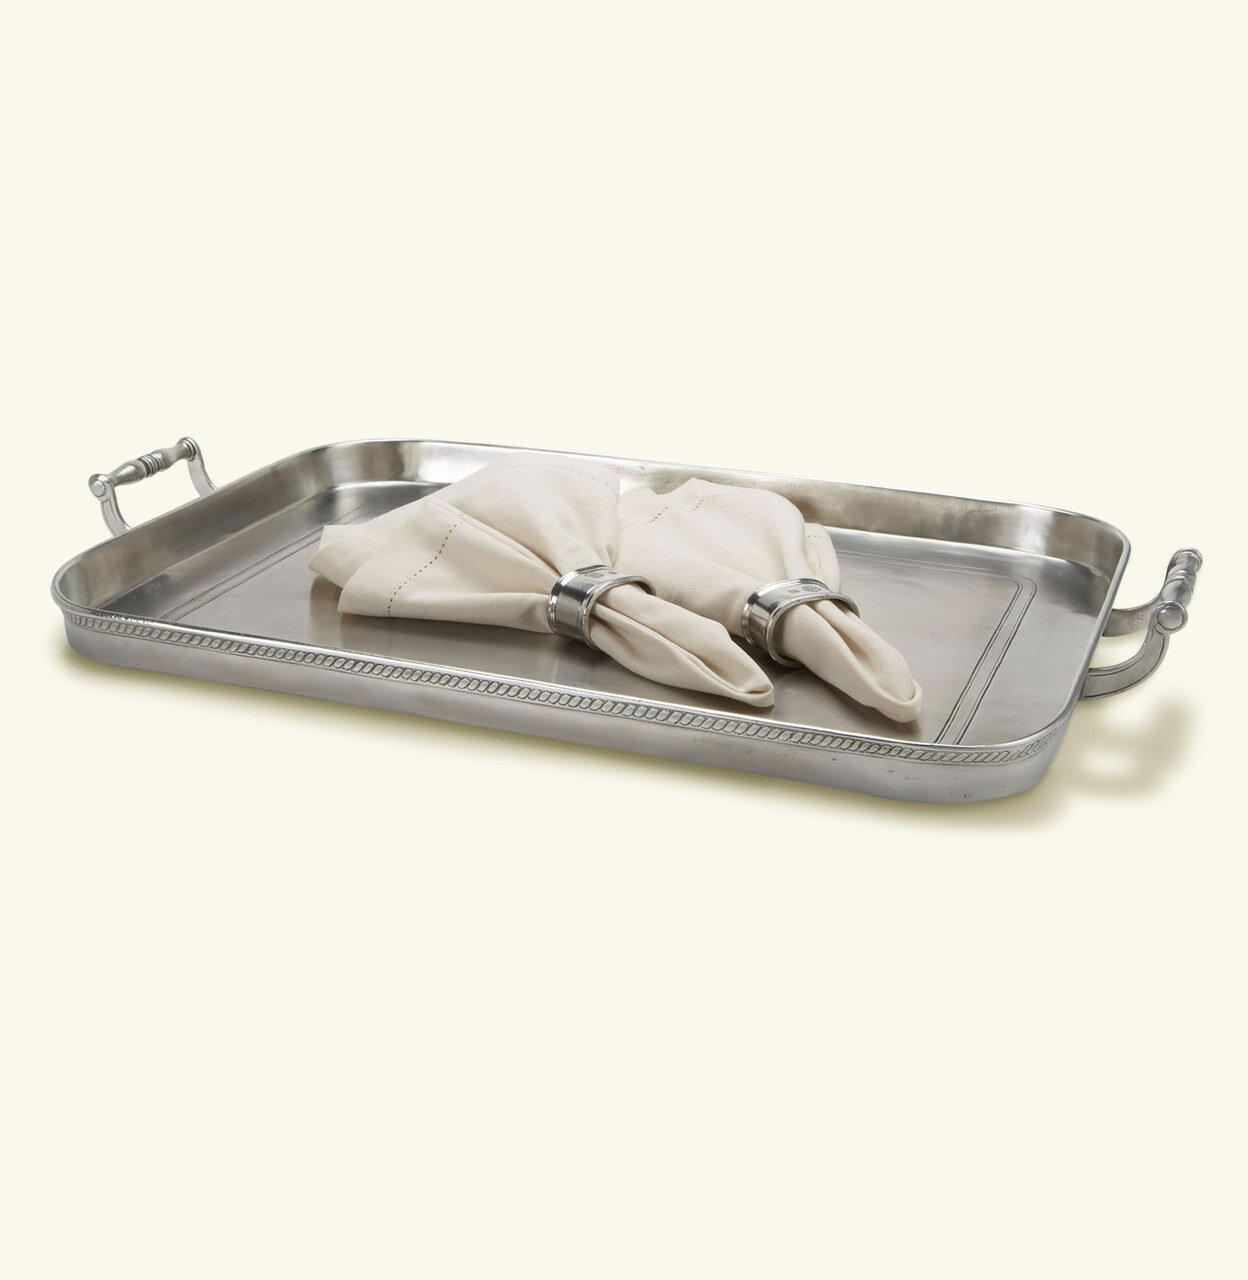 Match Pewter Gallery Tray With Handles Large a766.0